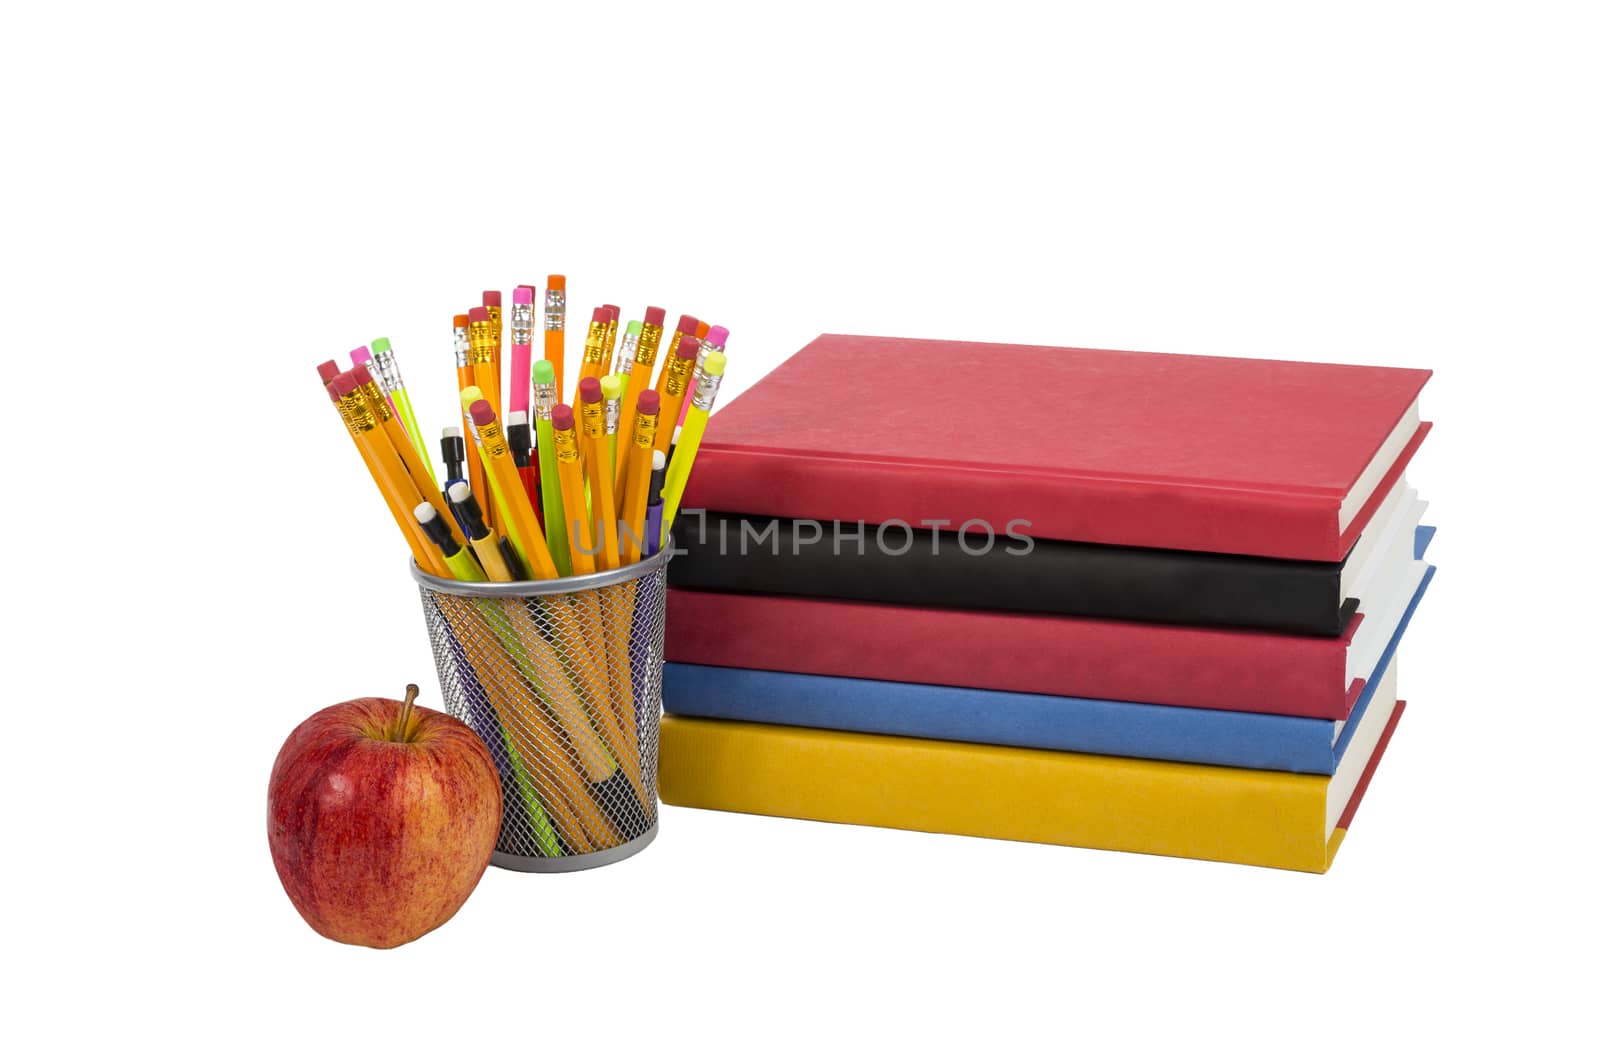 Stack of Books with Apple and Pencils by stockbuster1